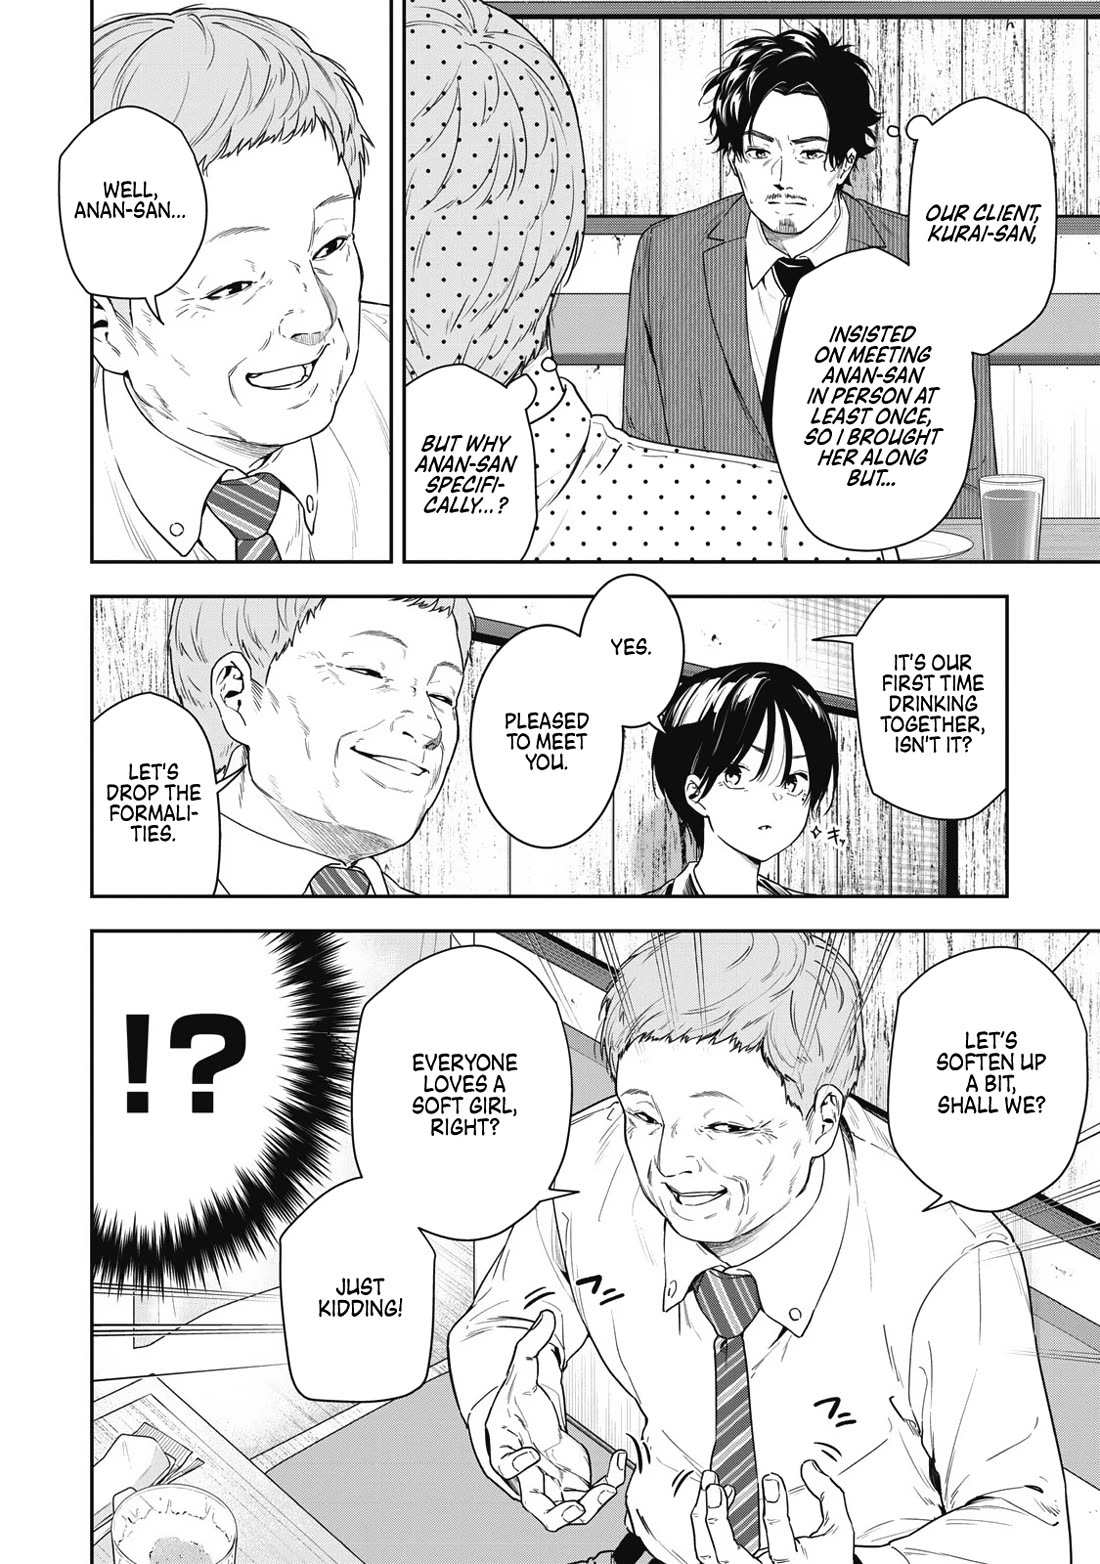 Anan-san Wants to Combine Within 3 Seconds of Meeting! - chapter 6 - #2